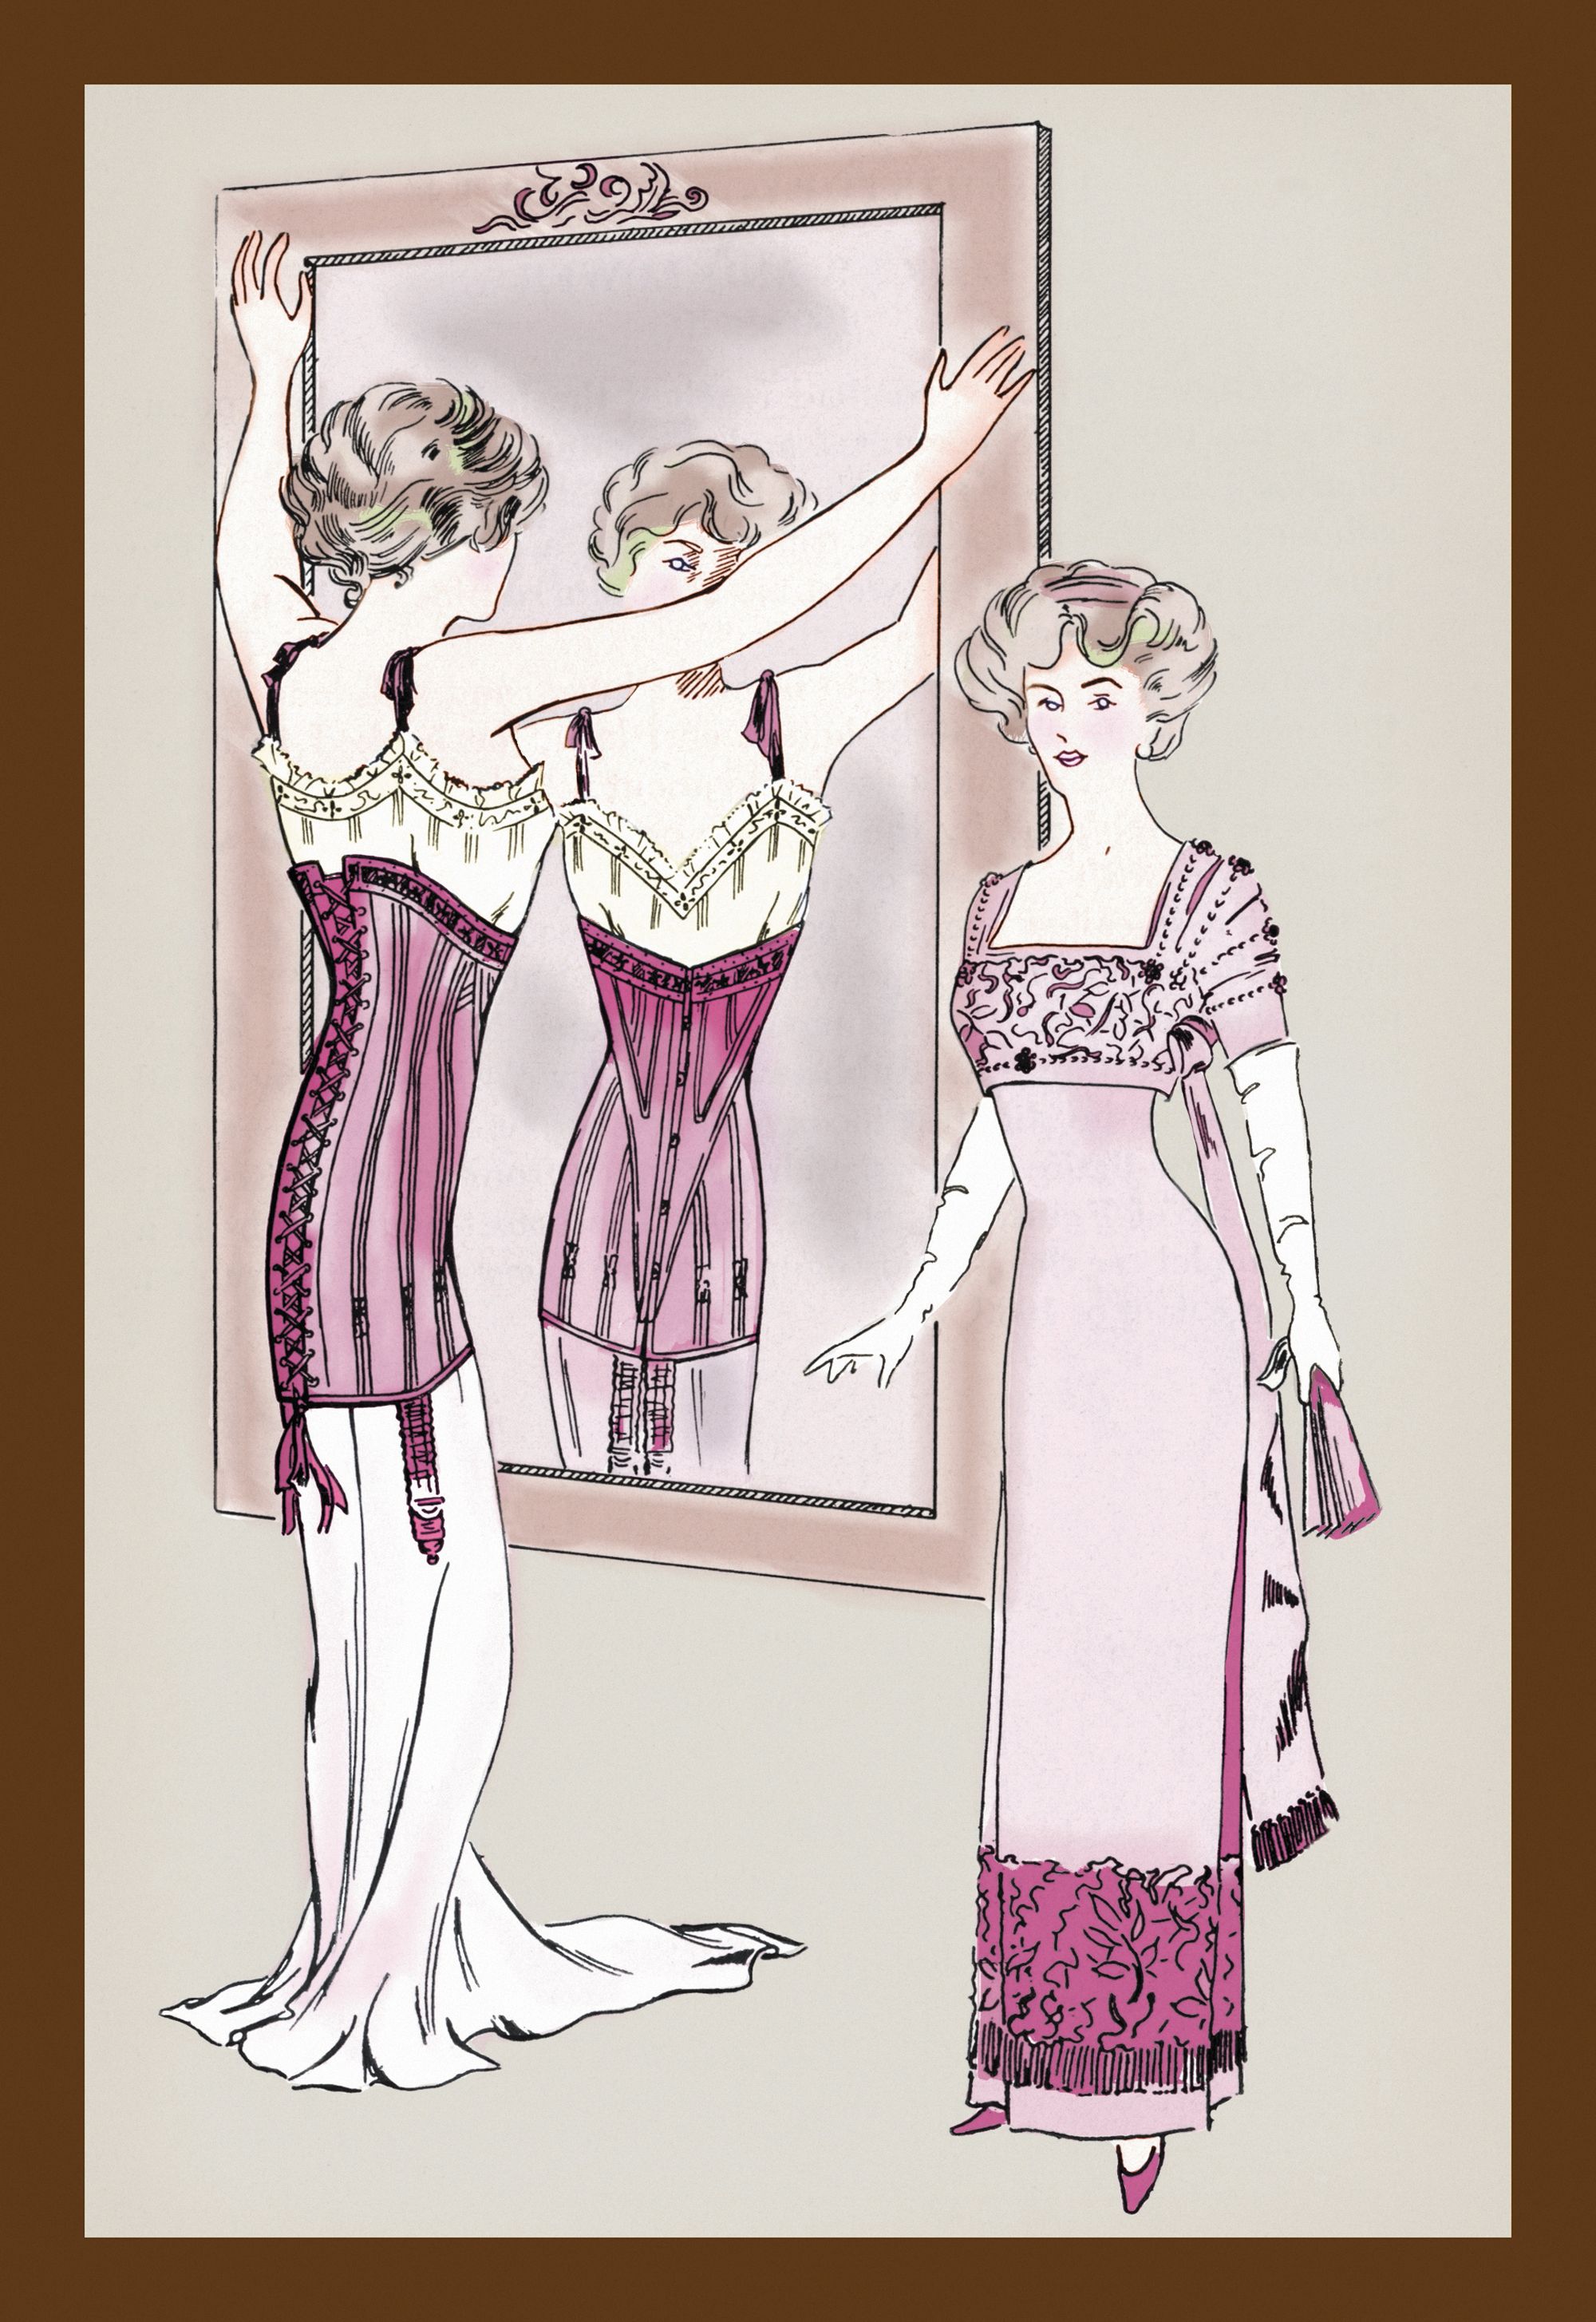 National Lingerie Day: How Underwear Has Evolved Through the Years 